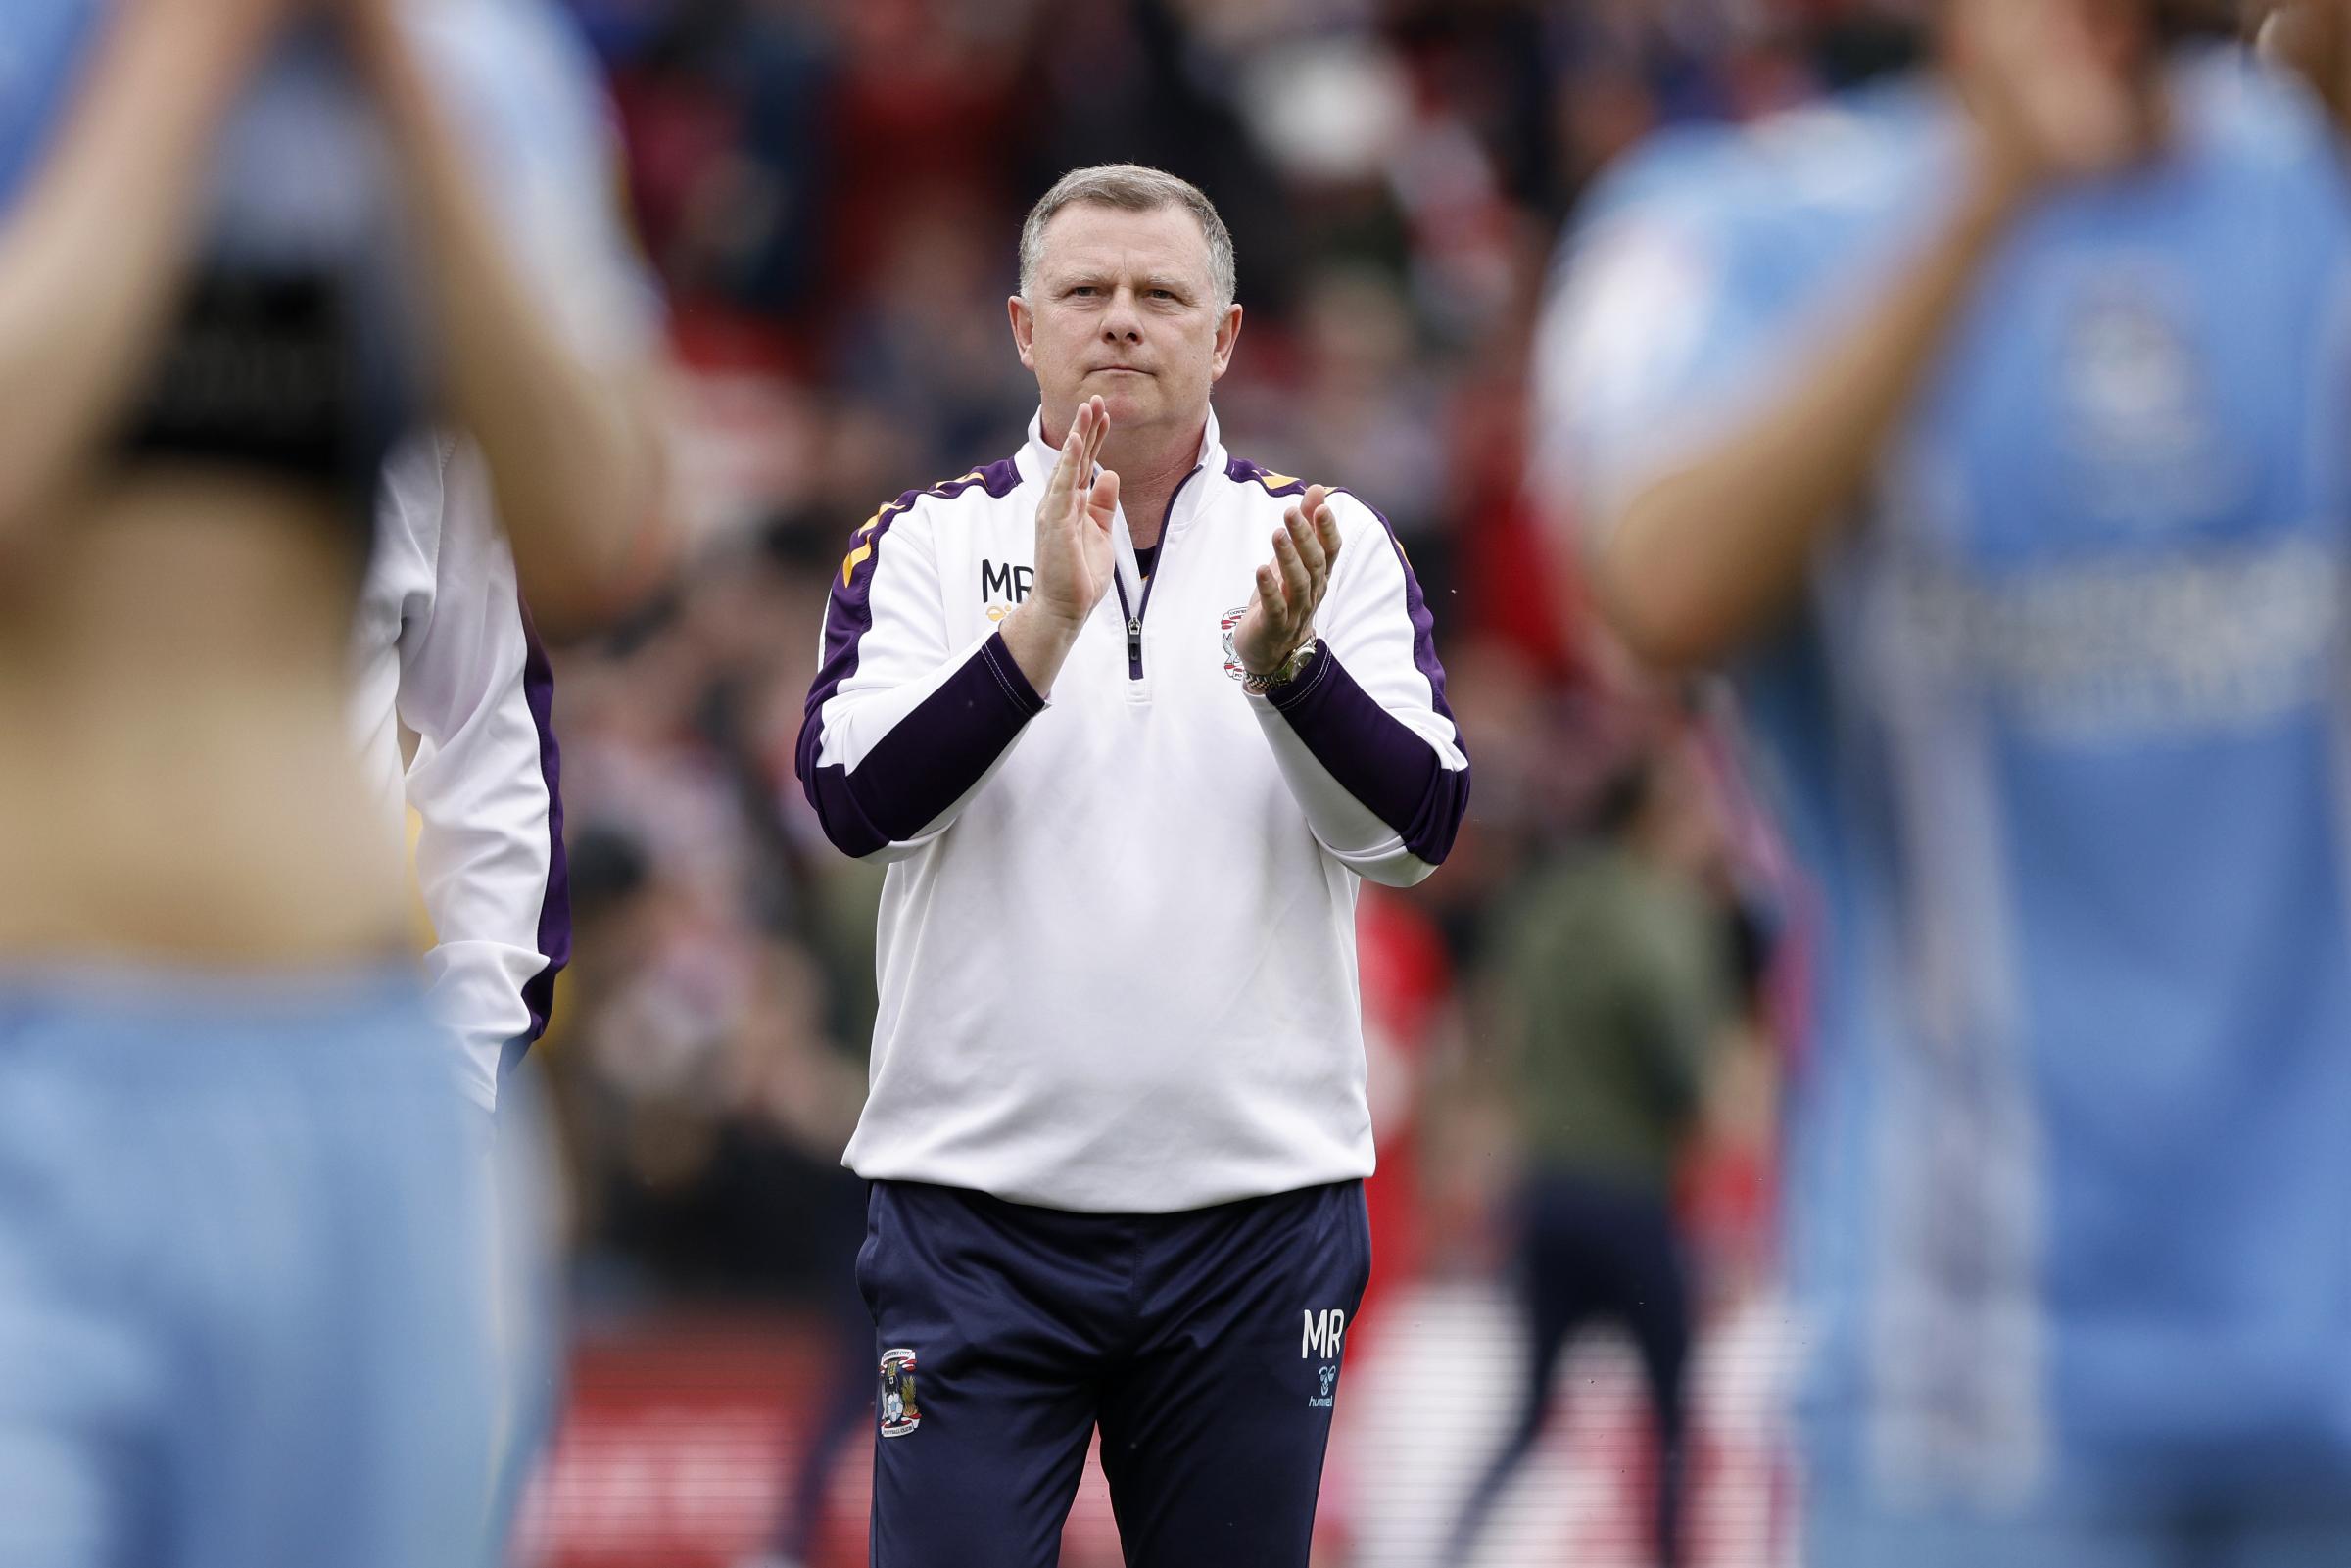 Middlesbrough: Coventry boss says there's 'lot more to come' from Boro